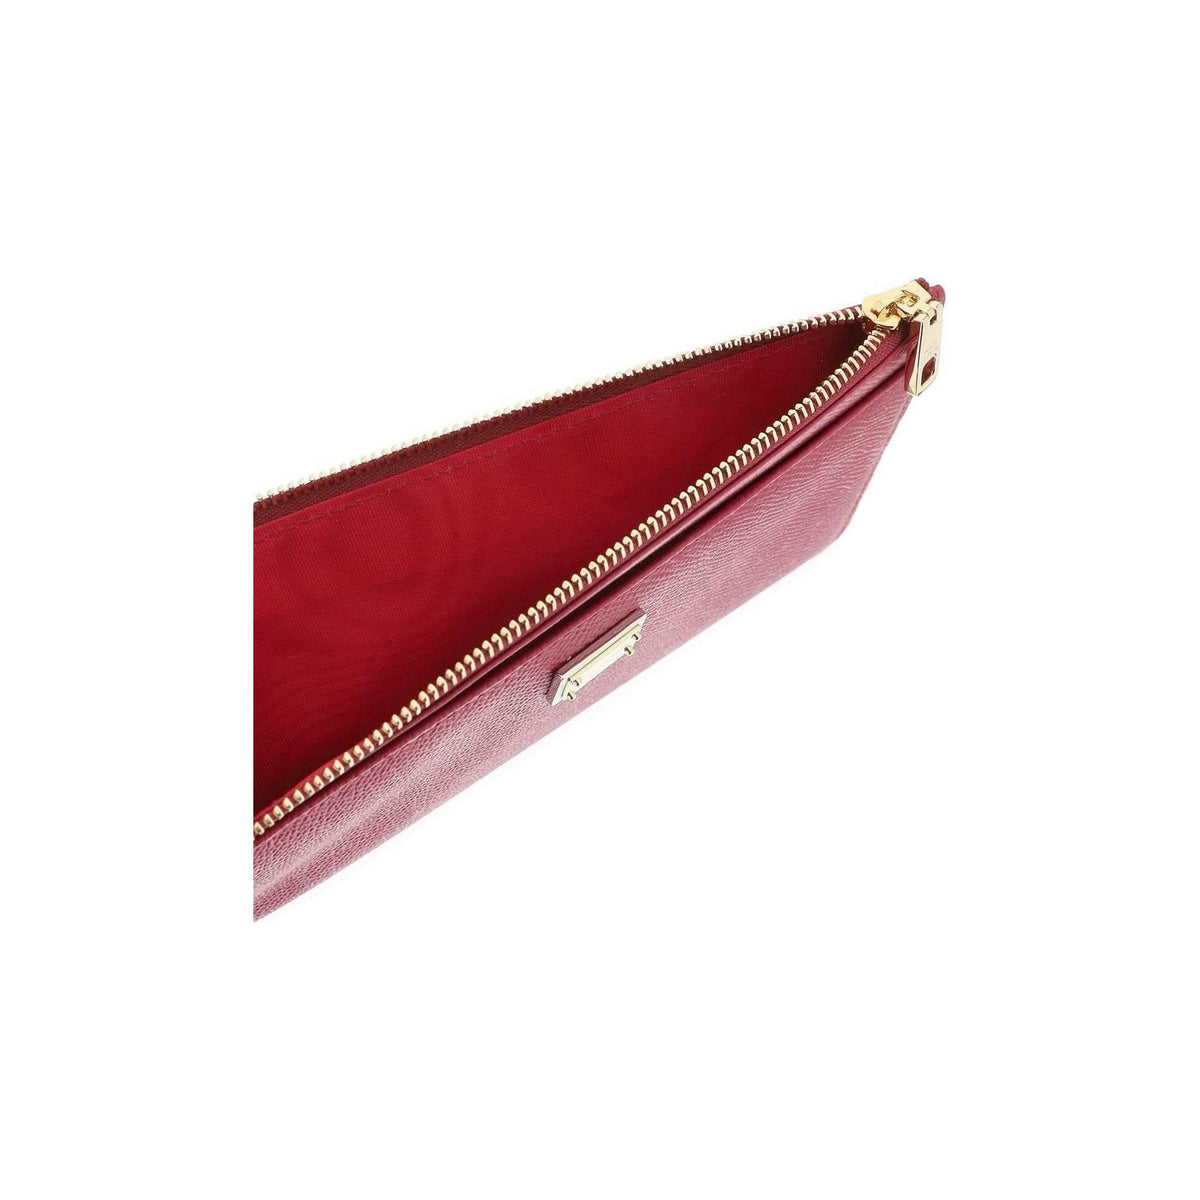 DOLCE & GABBANA - Bright Pink Dauphine Leather Zippered Cardholder Pouch - JOHN JULIA